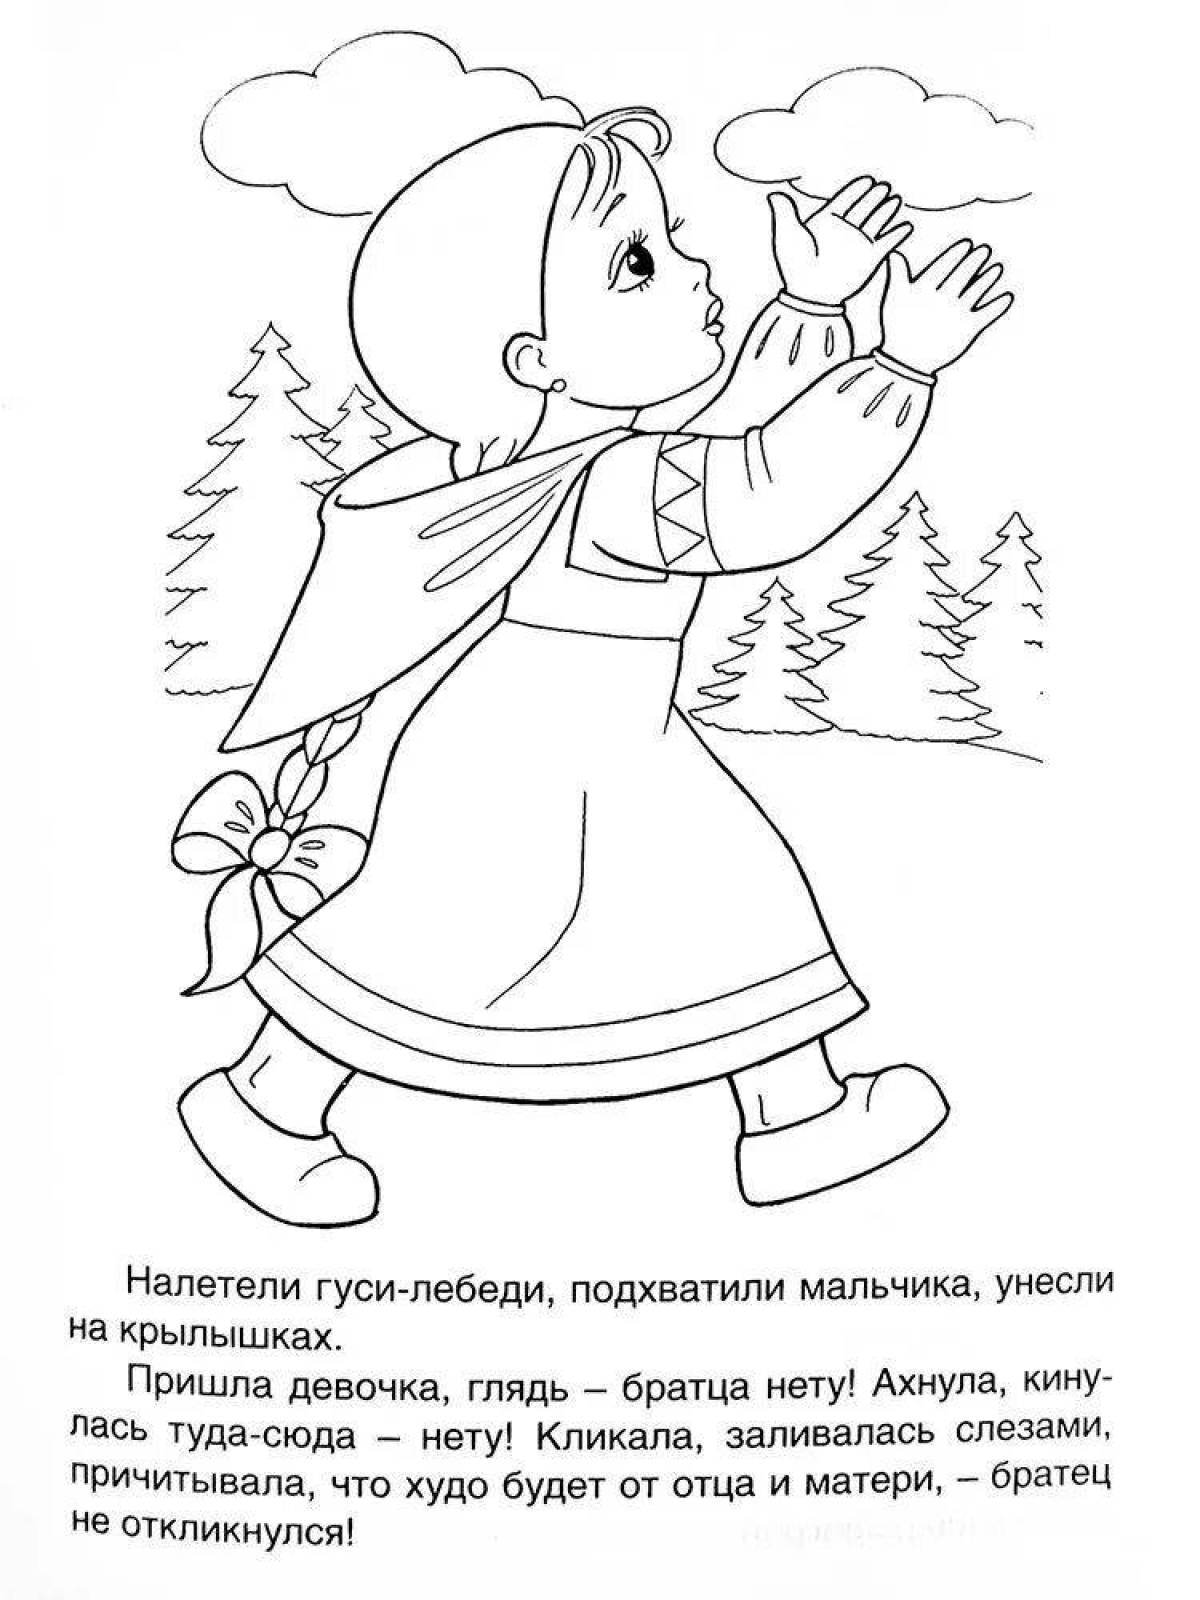 Dazzling swan geese coloring pages for kids